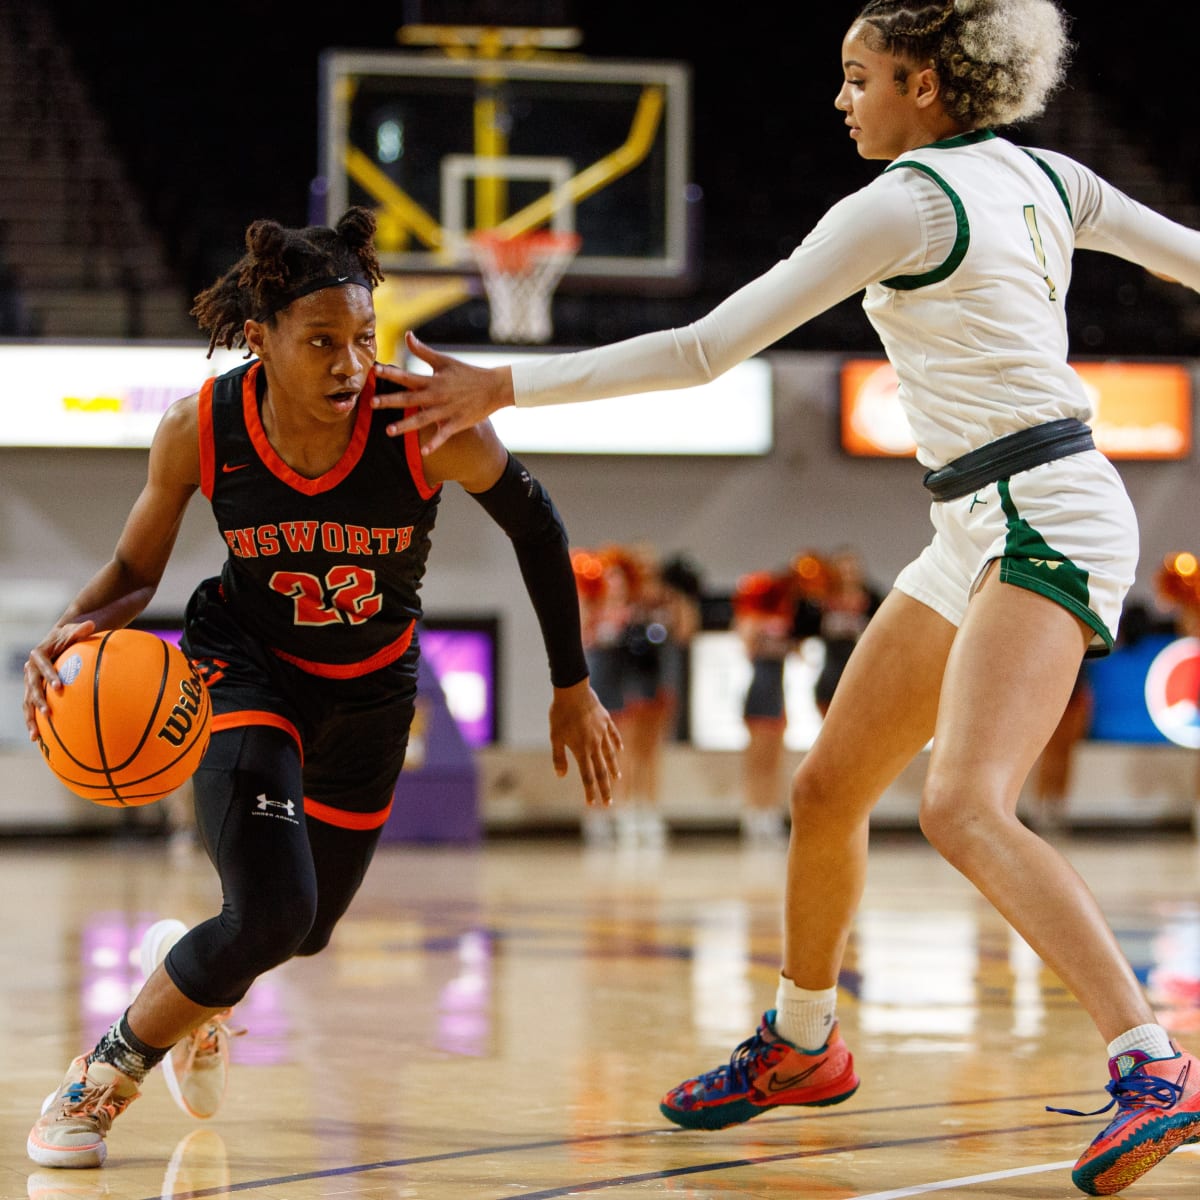 Louisville women's basketball hosting two top 10 prospects this